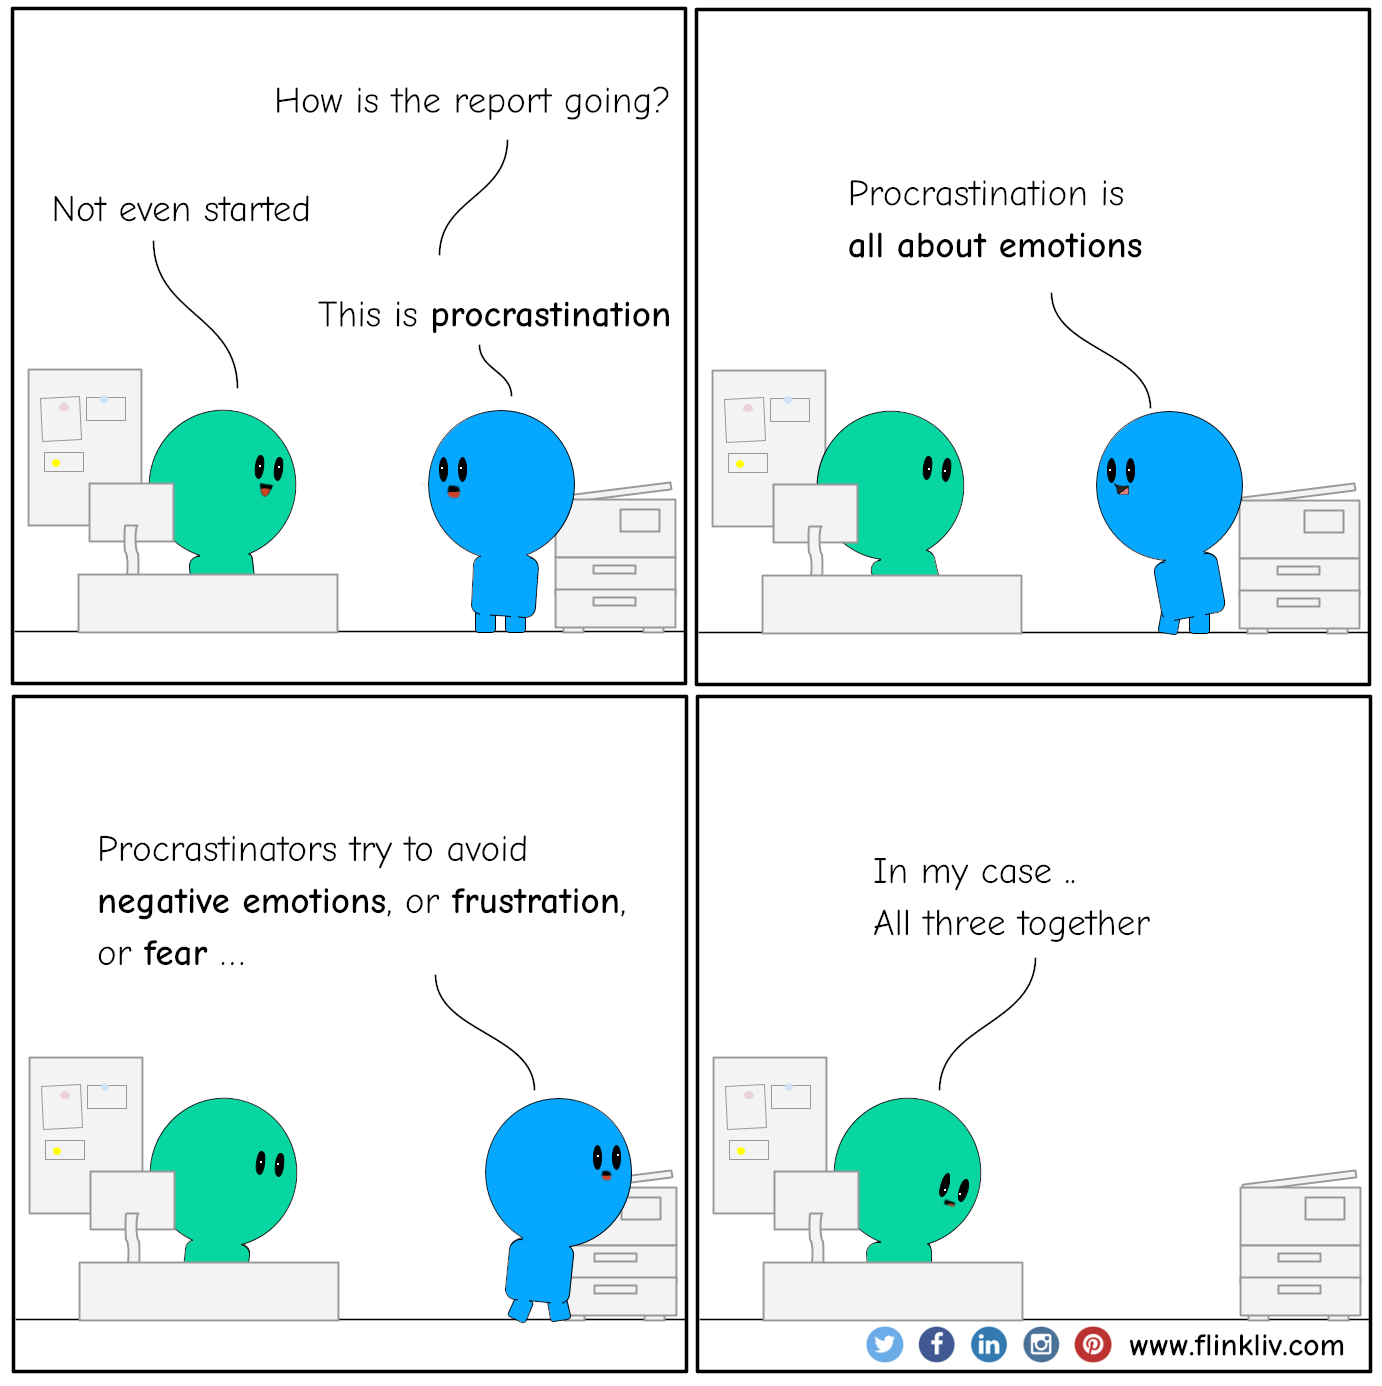 Conversation between A and B about procrastination. B: How is the report going? A:Not even started B:This is procrastination B: Procrastination is all about emotions. B: Procrastinators try to avoid negative emotions, or frustration, or fear. A:In my case, all three together. By flinkliv.com